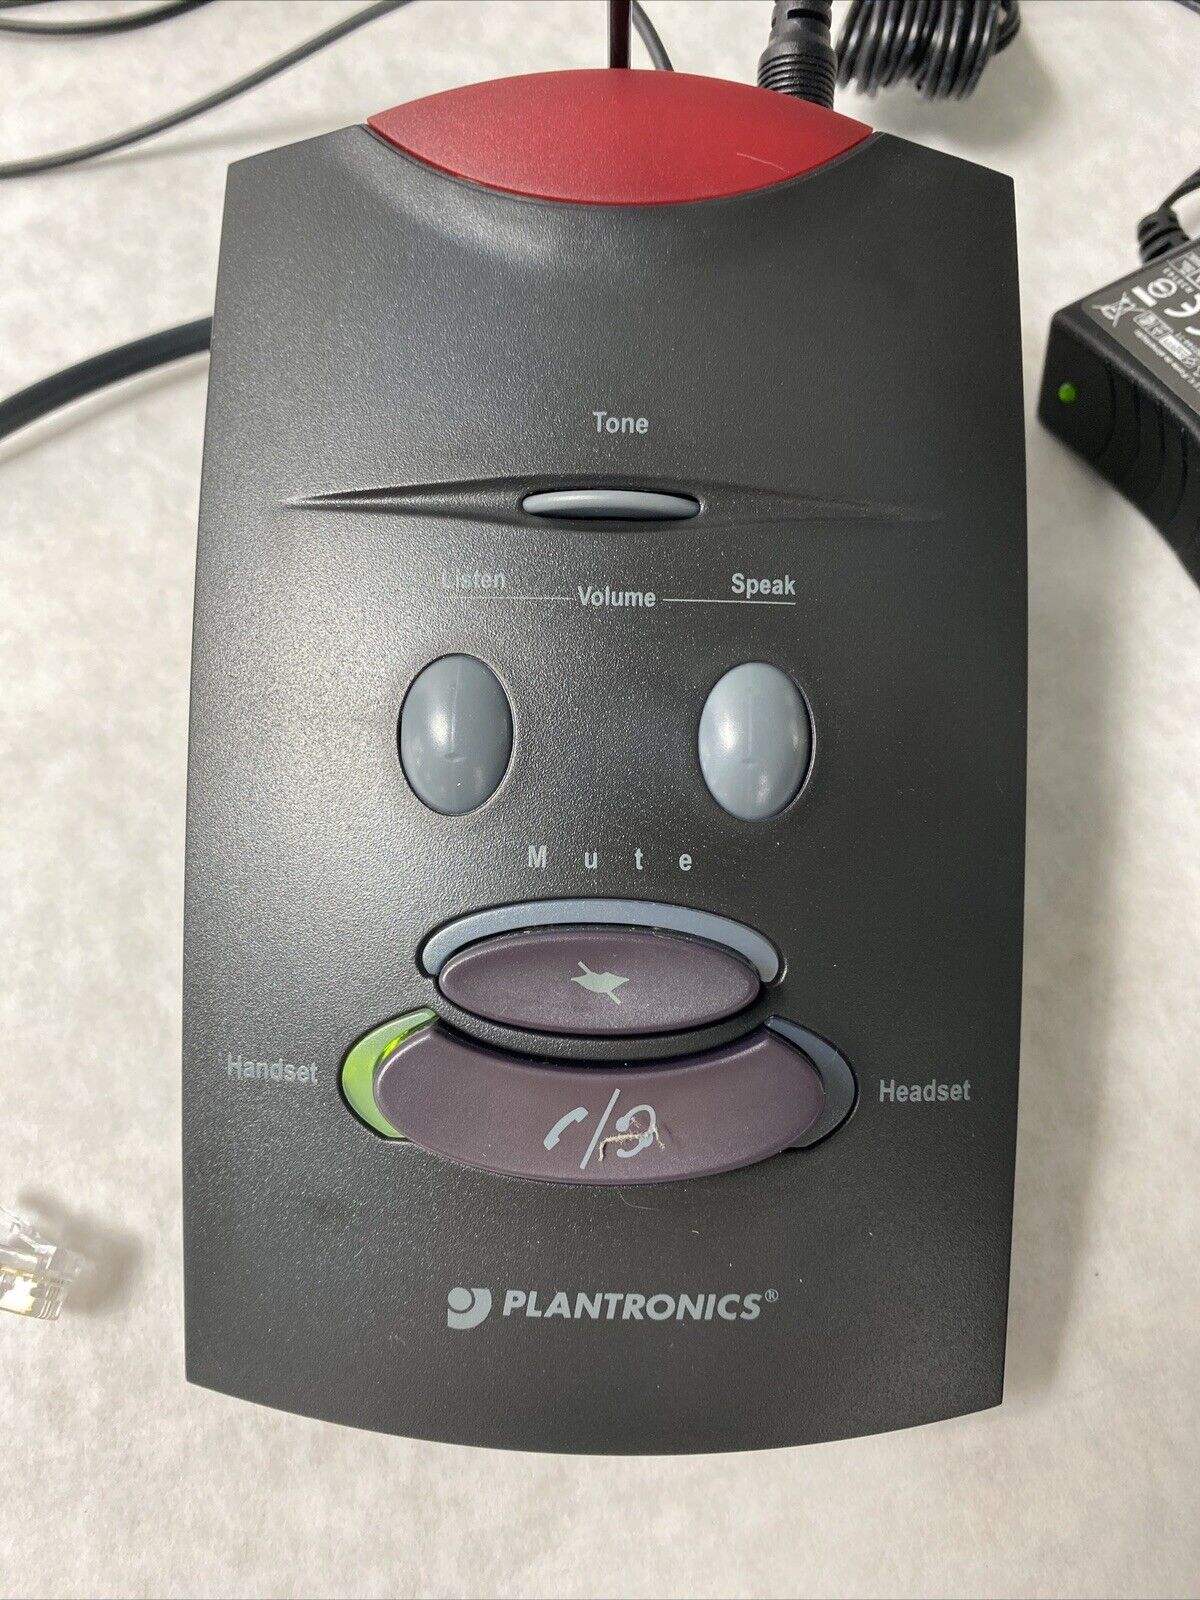 Plantronics S11 System Over Head Telephone Headset w/Noise Canceling Microphone